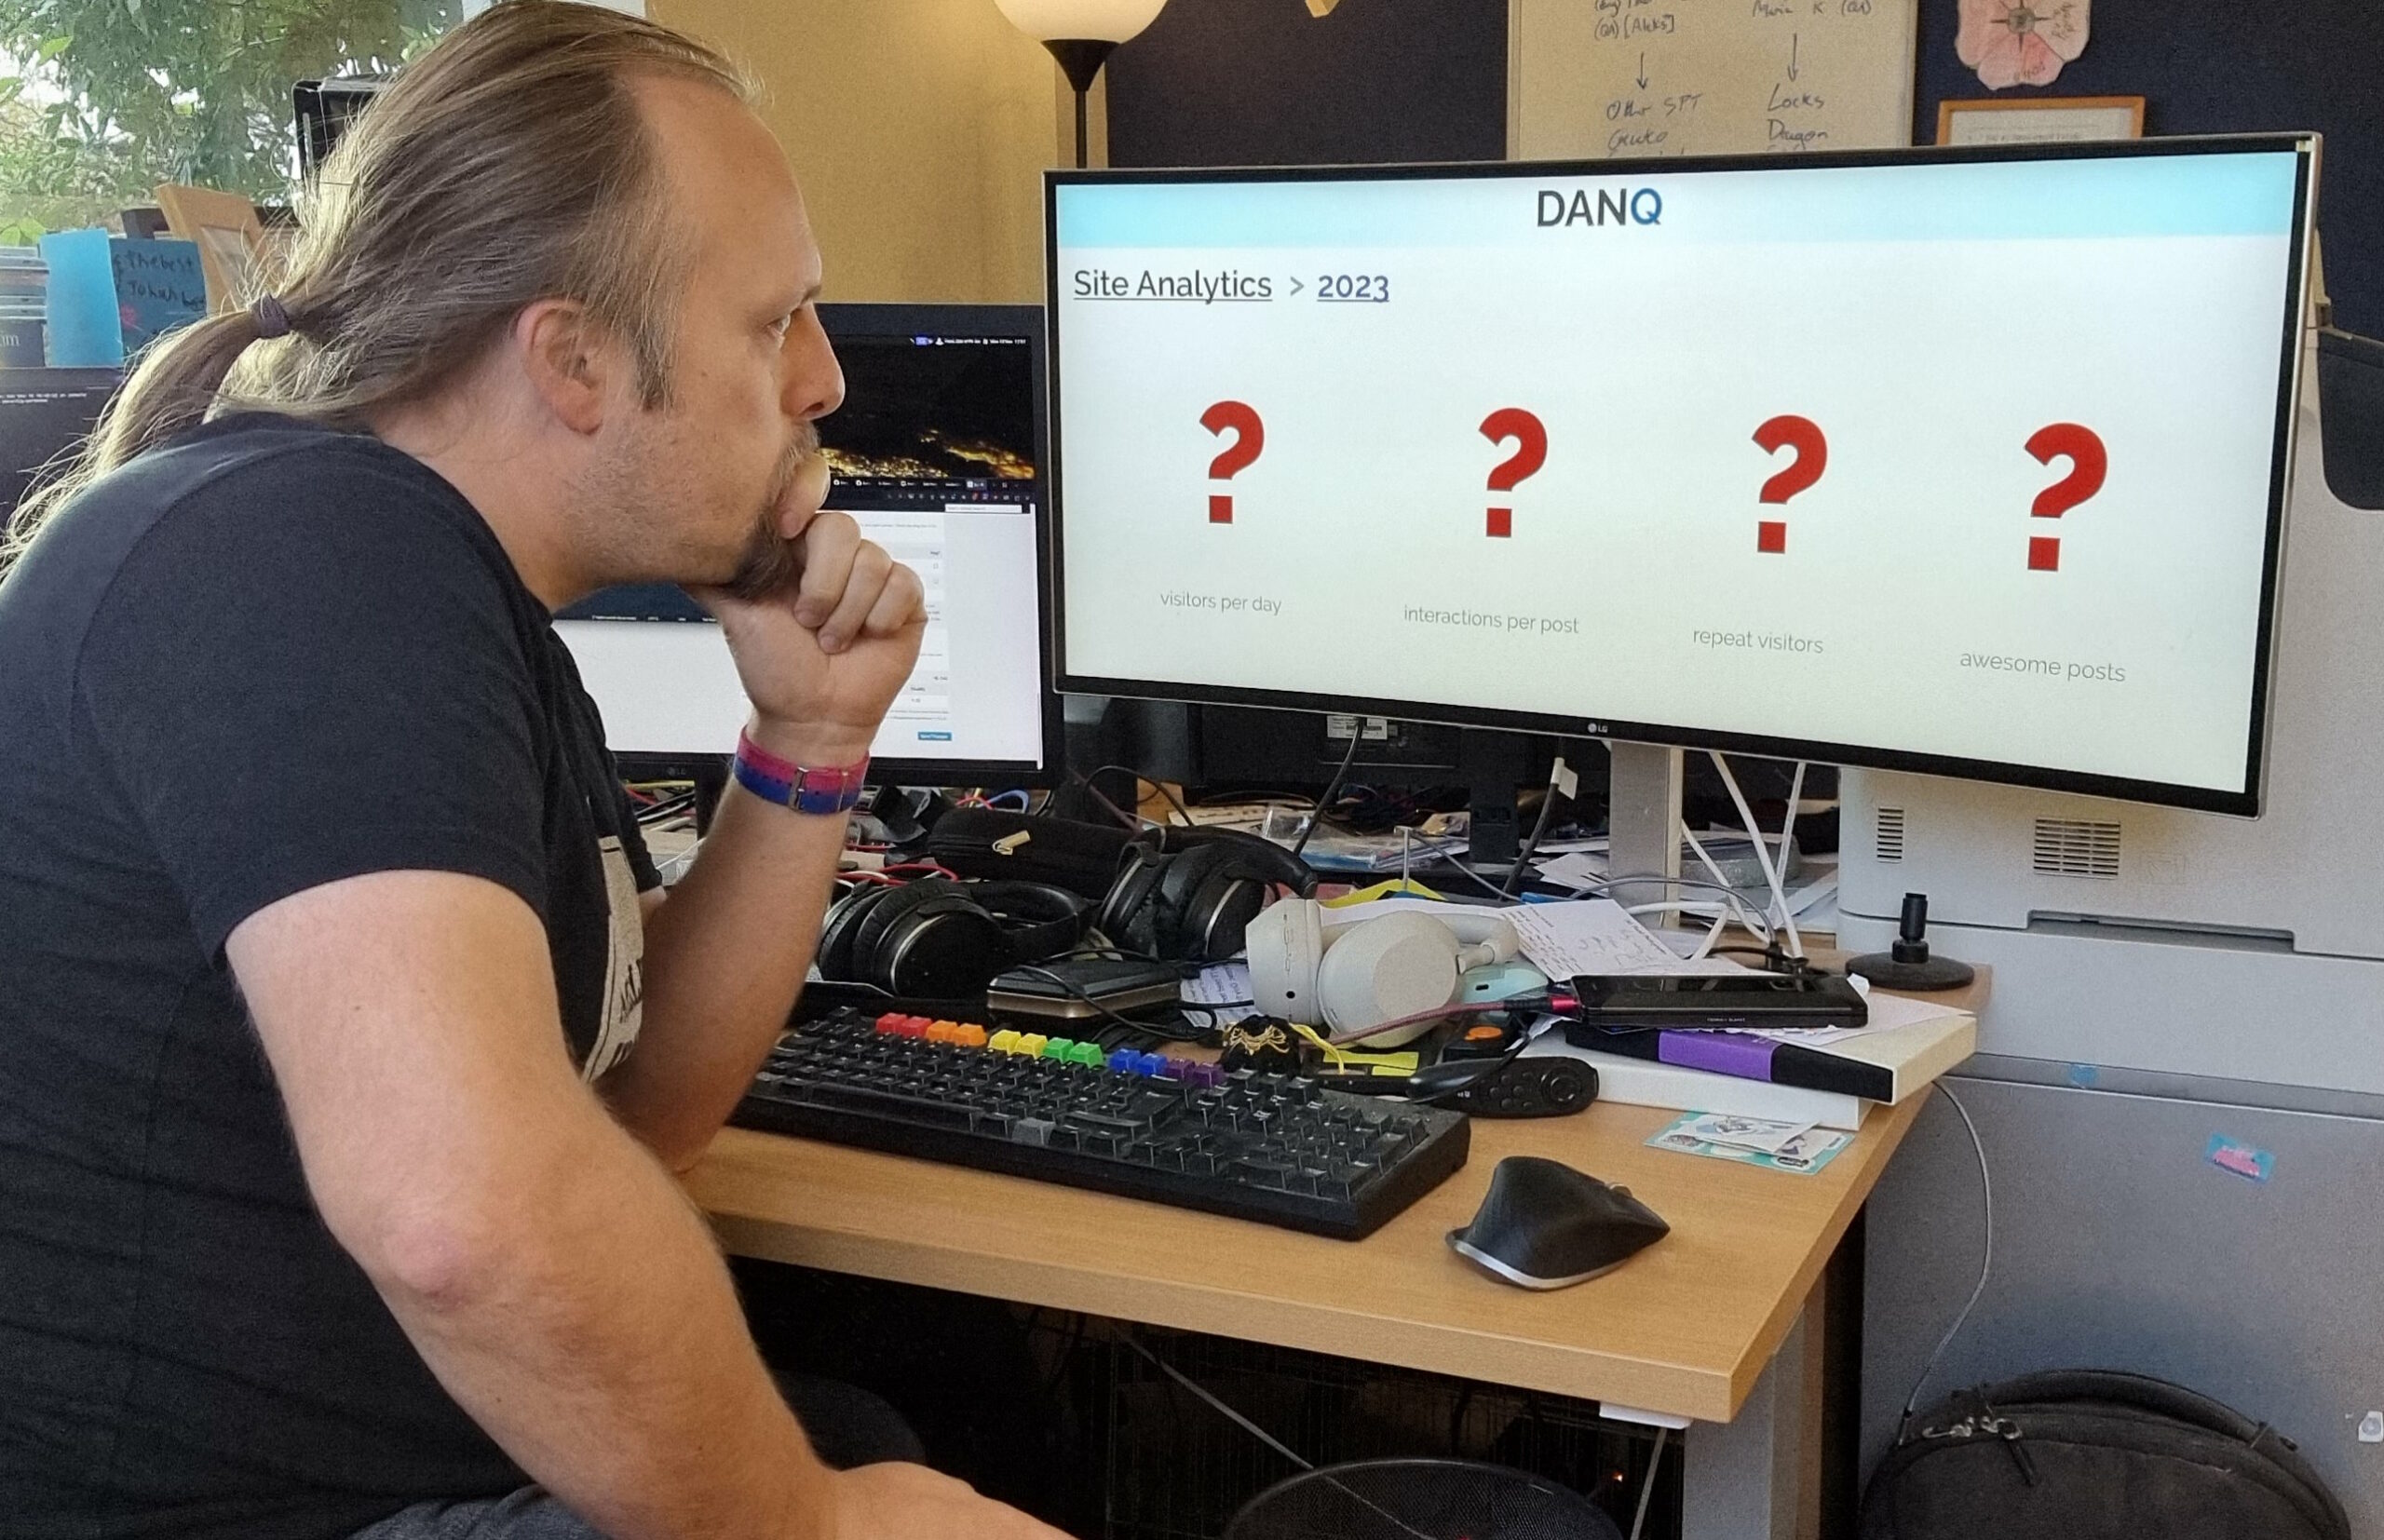 Dan, wearing a black t-shirt and jeans, sits hunched over a keyboard with Pride-coloured keys, looking thoughtfully at a widescreen monitor. On the monitor is a mocked-up screenshot showing site analytics for DanQ.me, but with question marks for every datapoint.